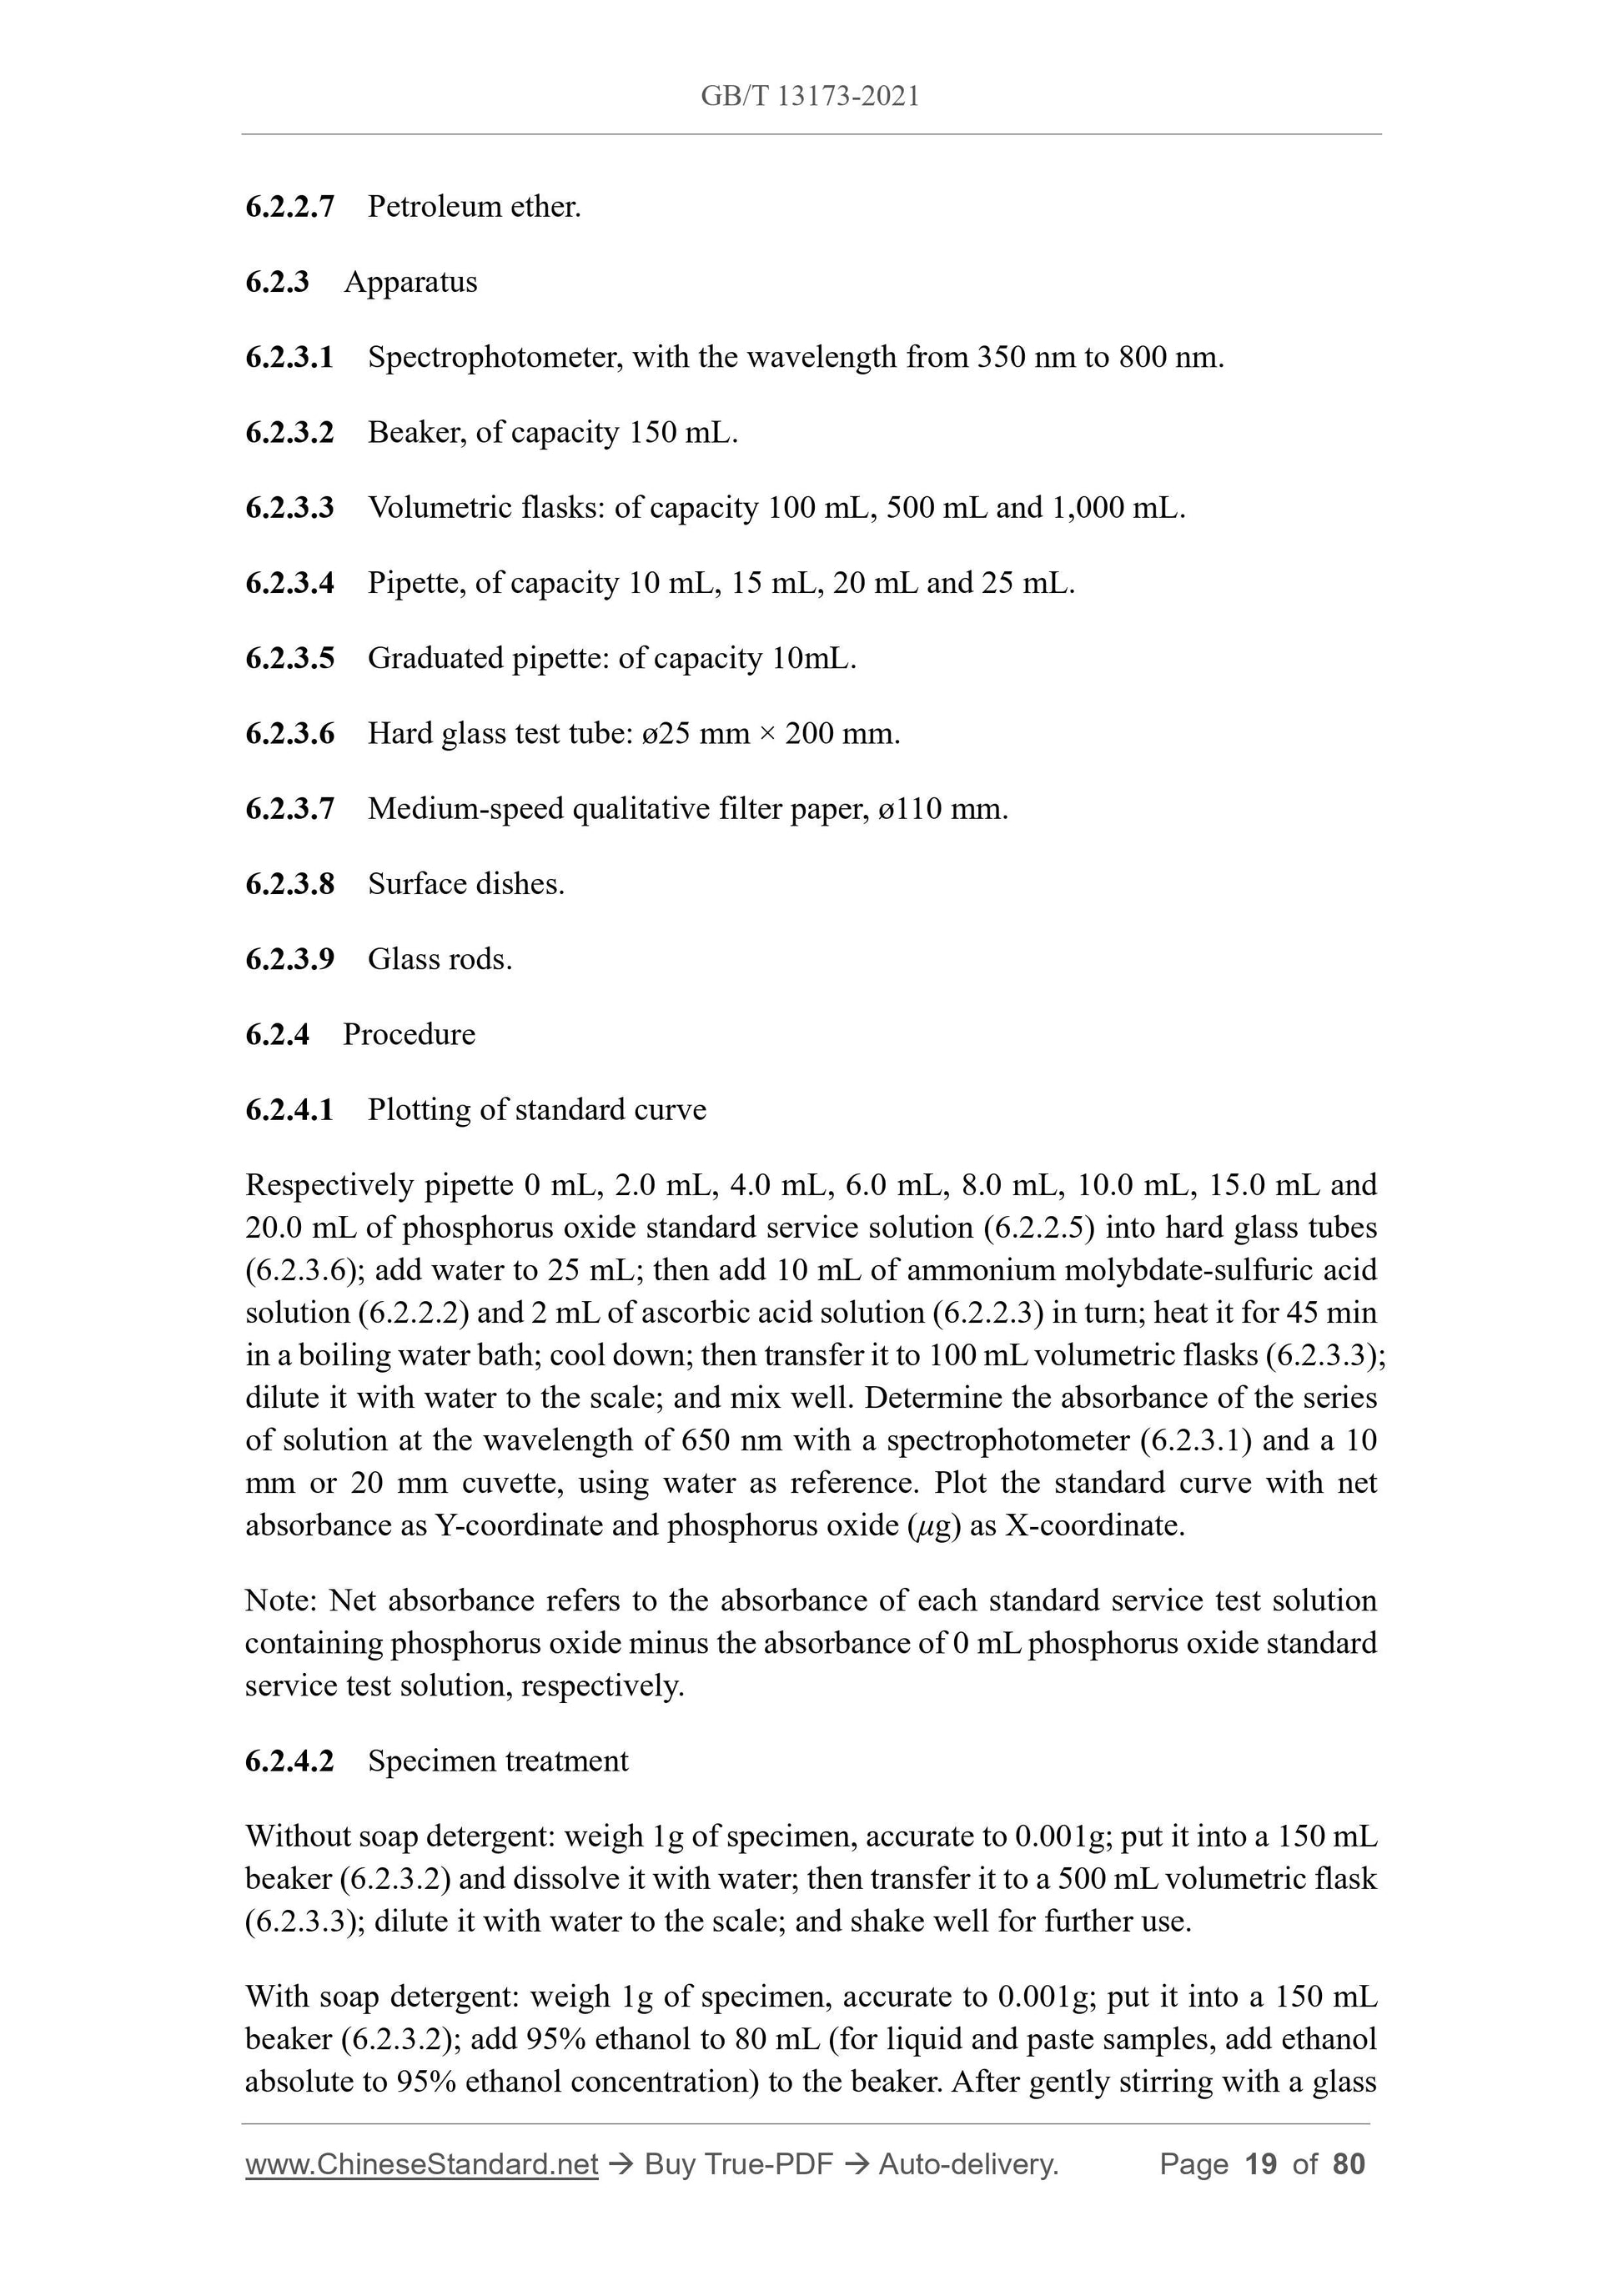 GB/T 13173-2021 Page 9